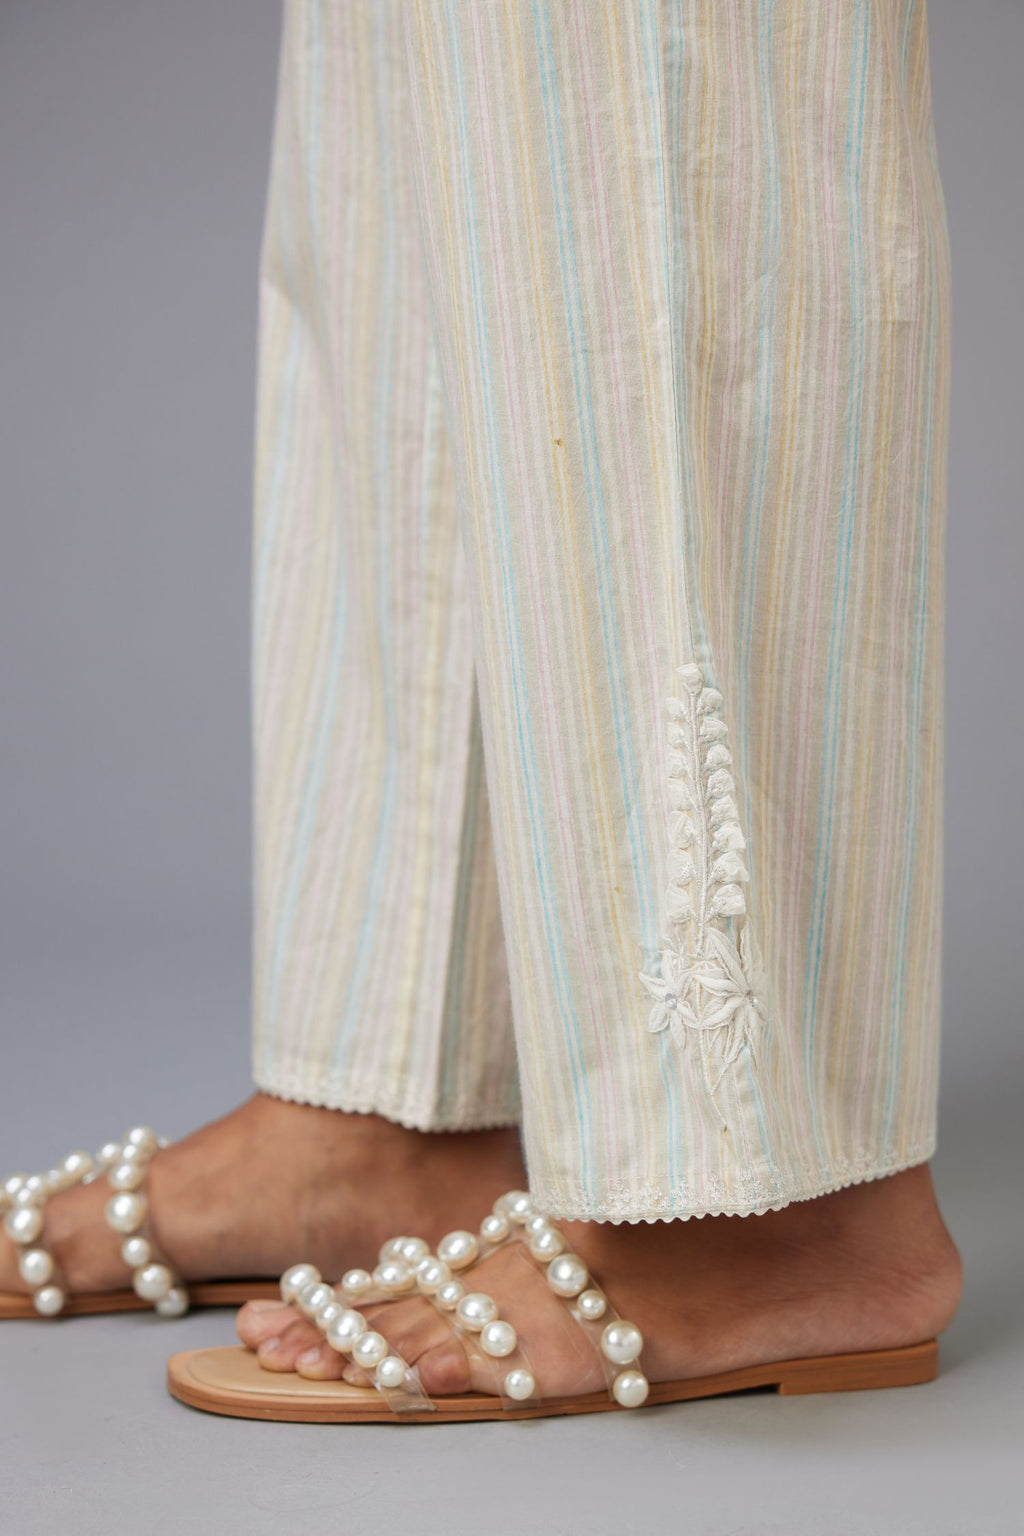 Multi printed stripe Cotton straight pants with a chiffon embroidered boota at the hem.